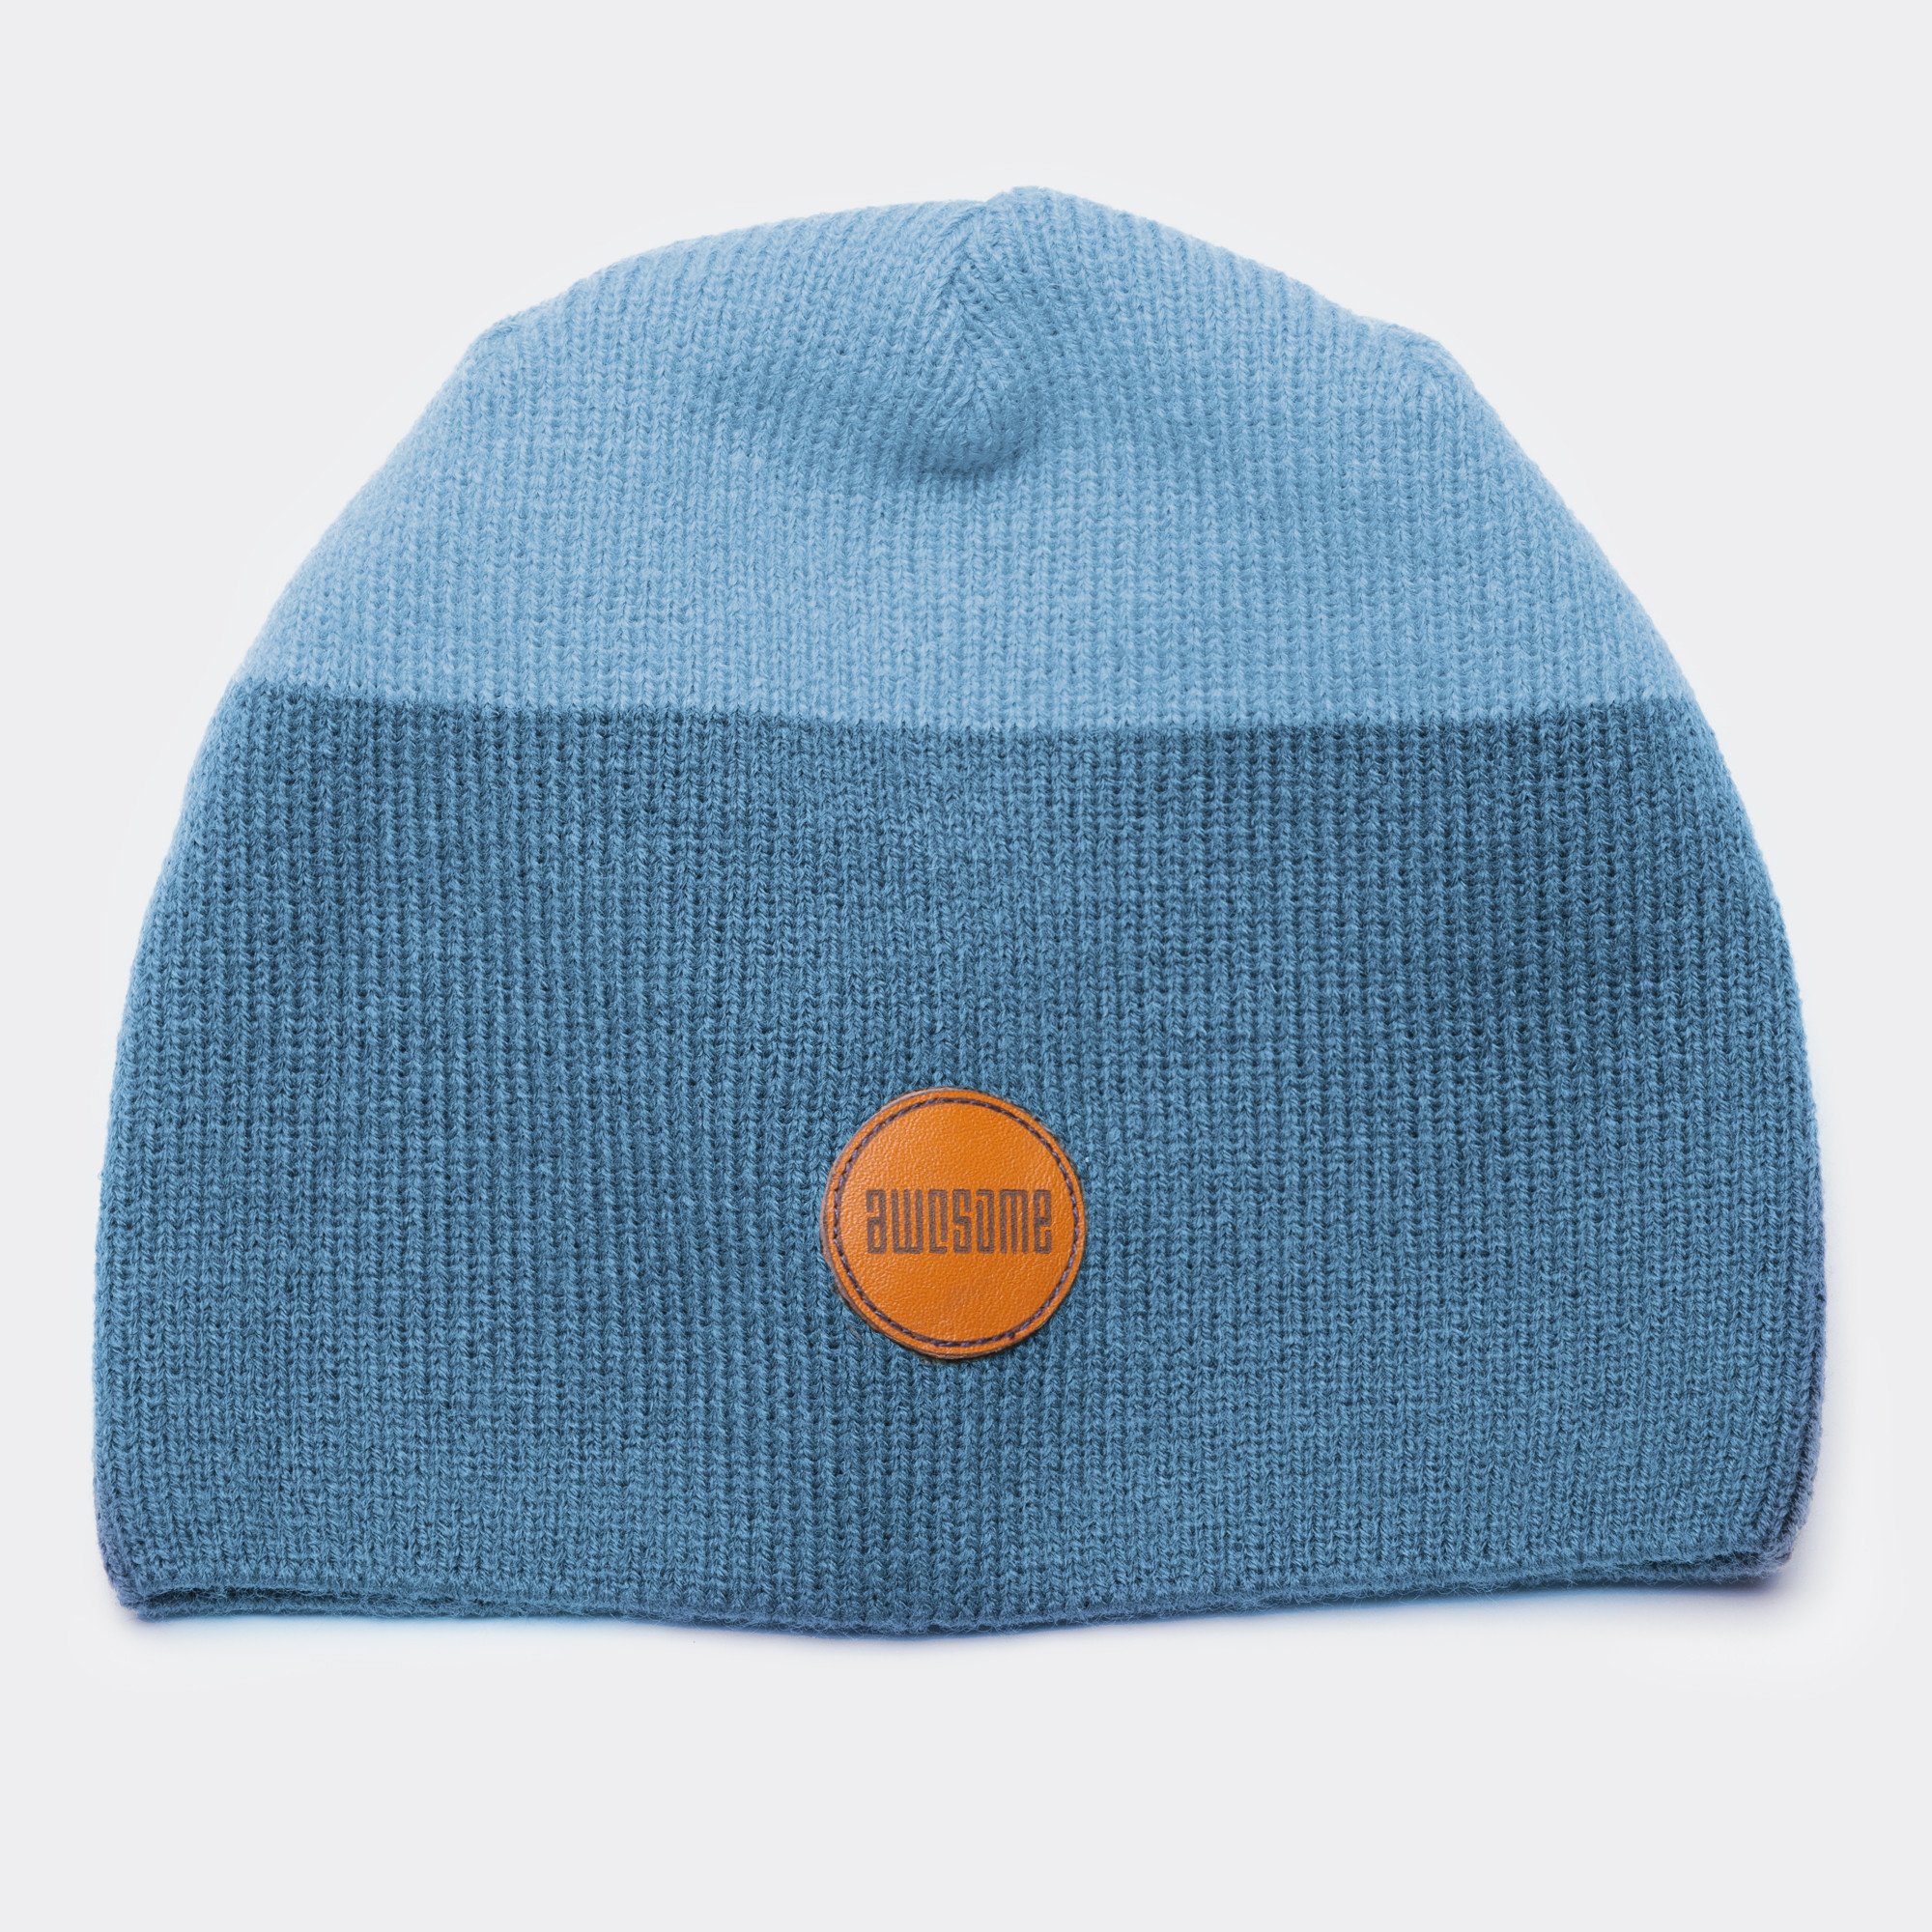 Awesome Beanie Leather Patch - Navy / Light Blue